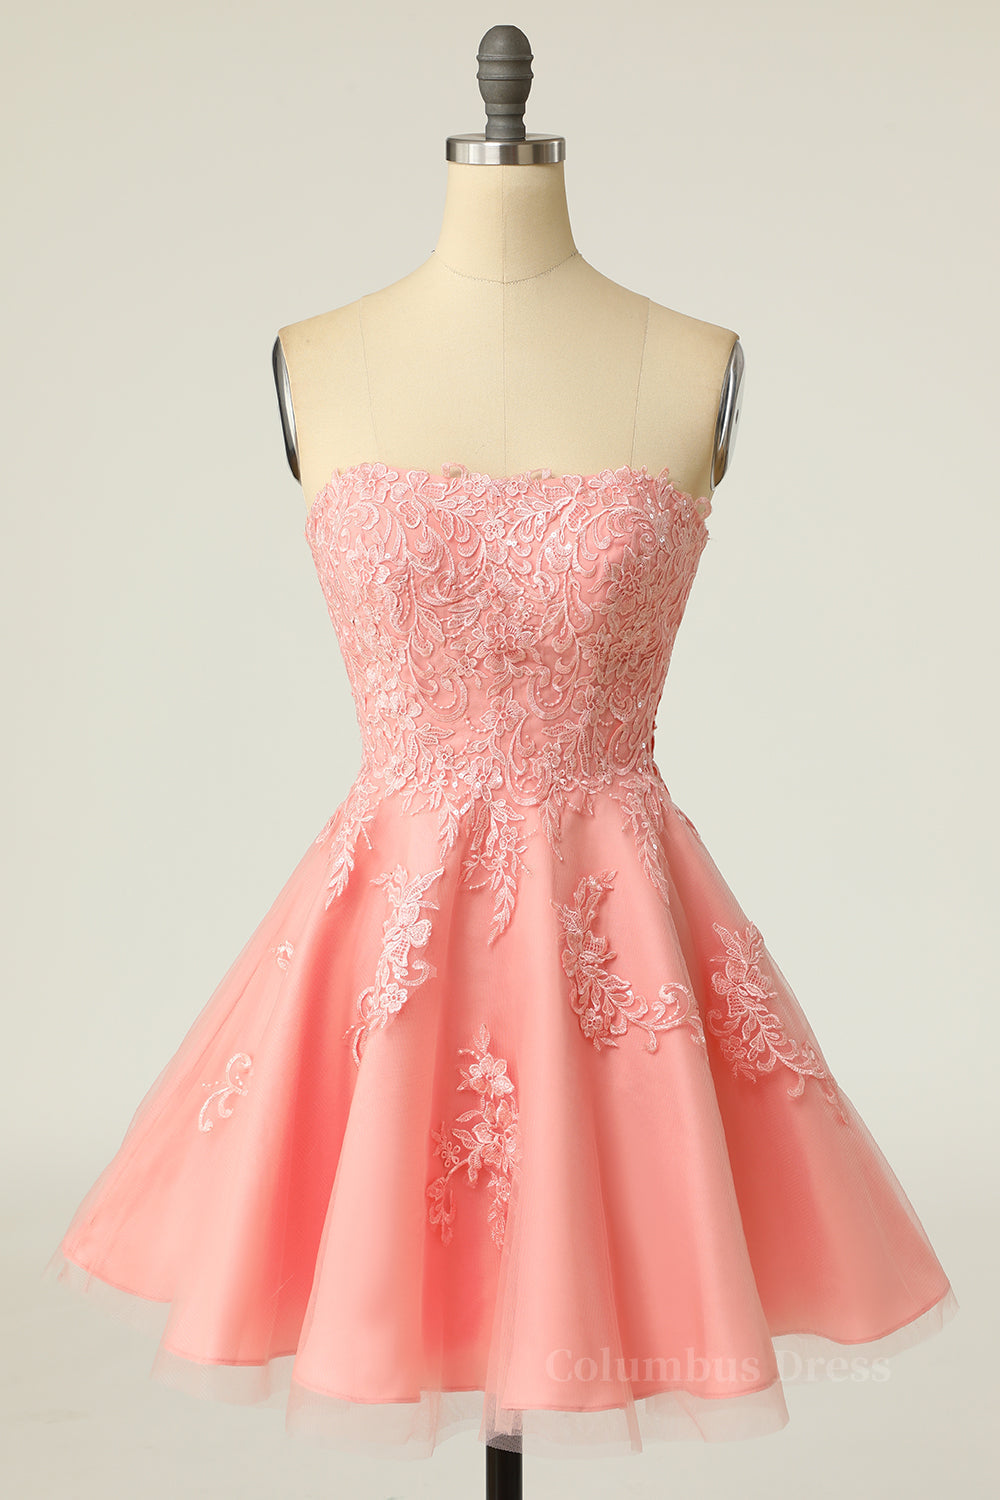 Bridesmaid Dress Style, Coral Strapless A-line Appliques Short Prom Dress